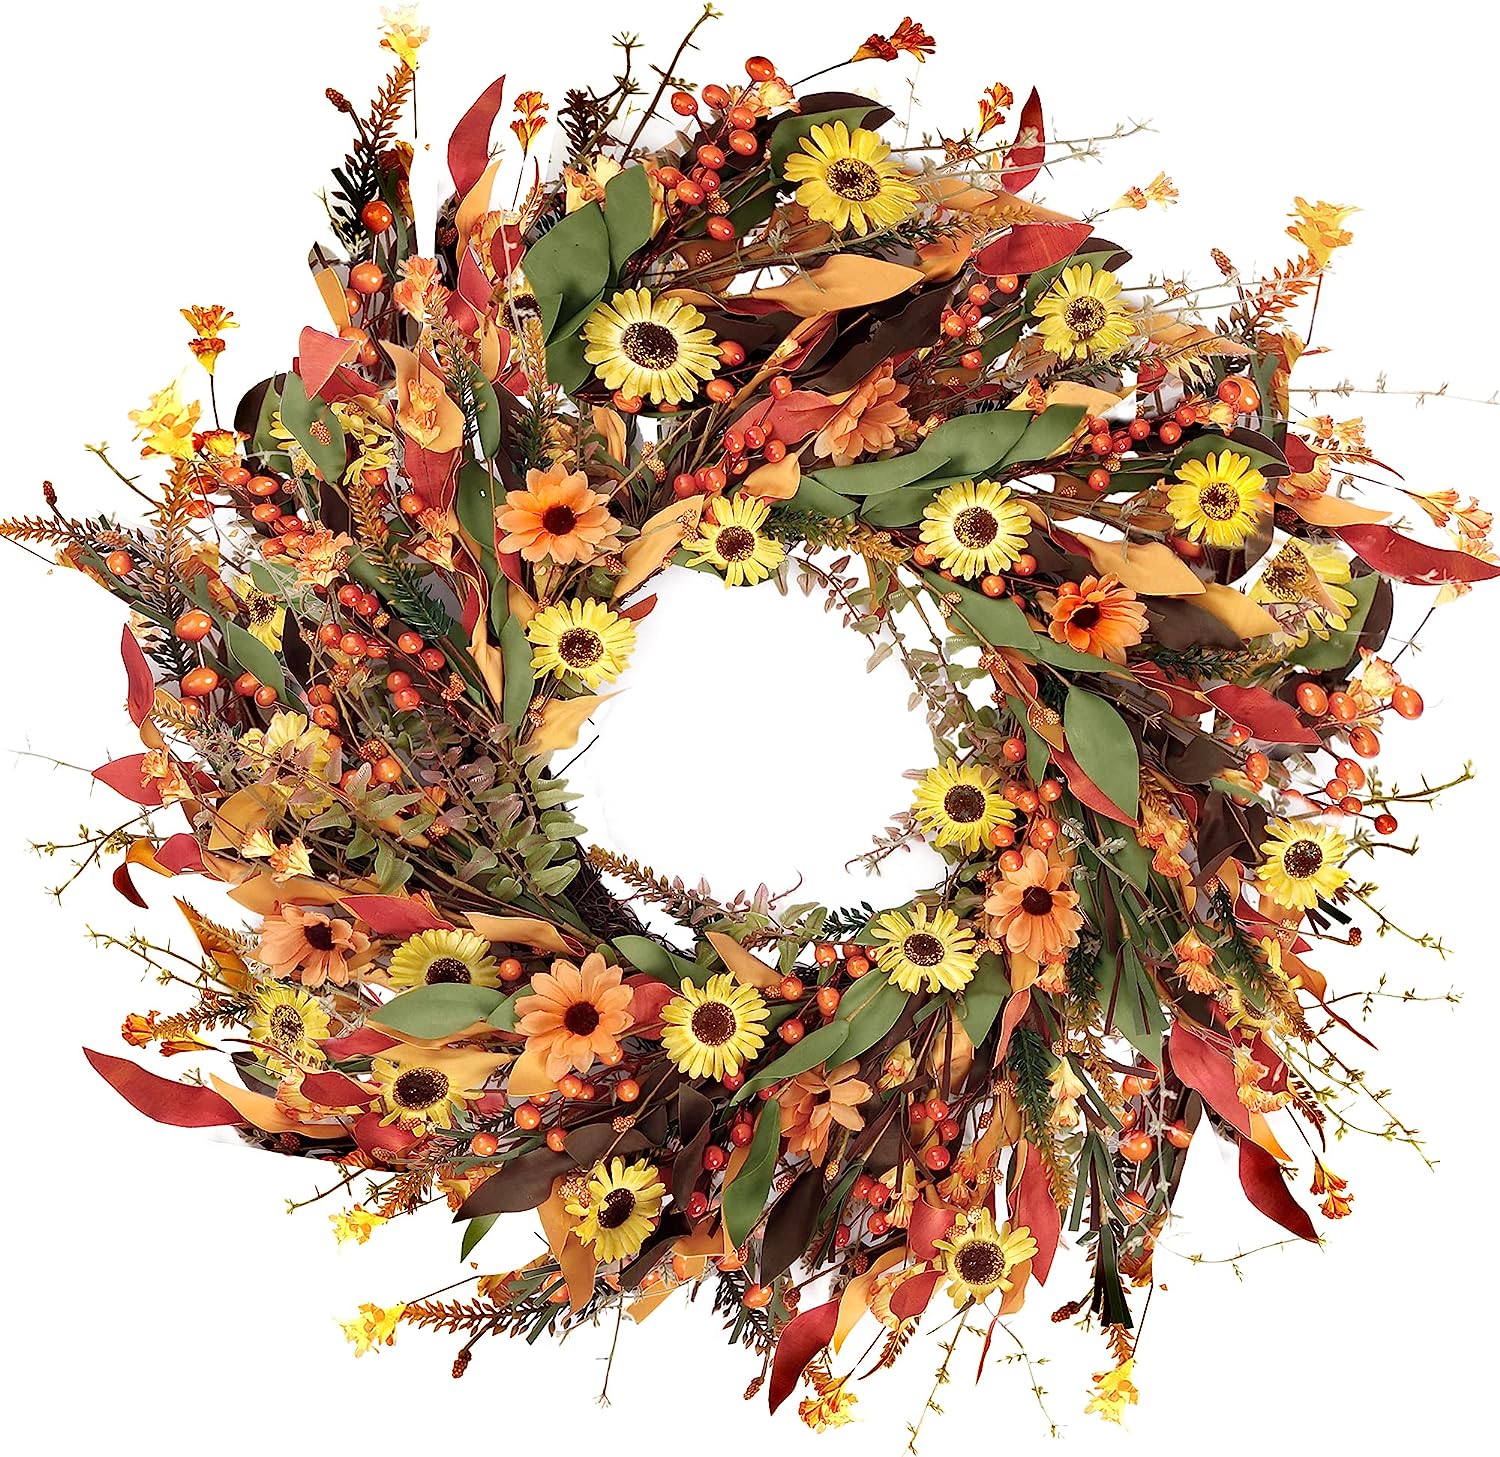 Sggvecsy Harvest Wreath with Daisies